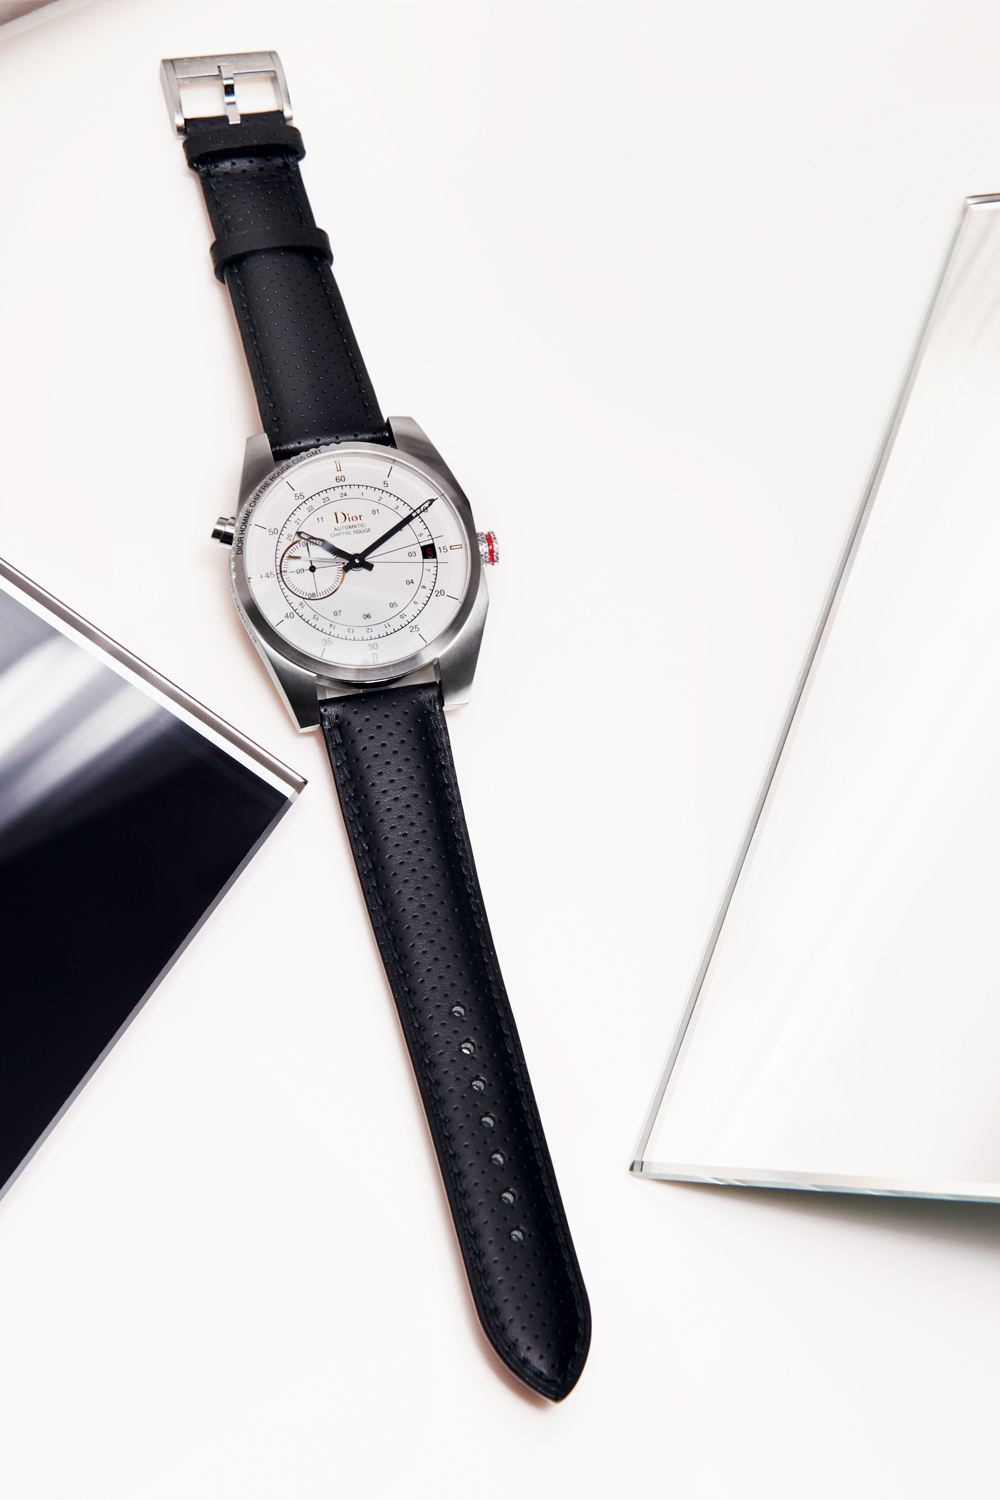 Watch Review-Dior Chiffre Rouge C05 